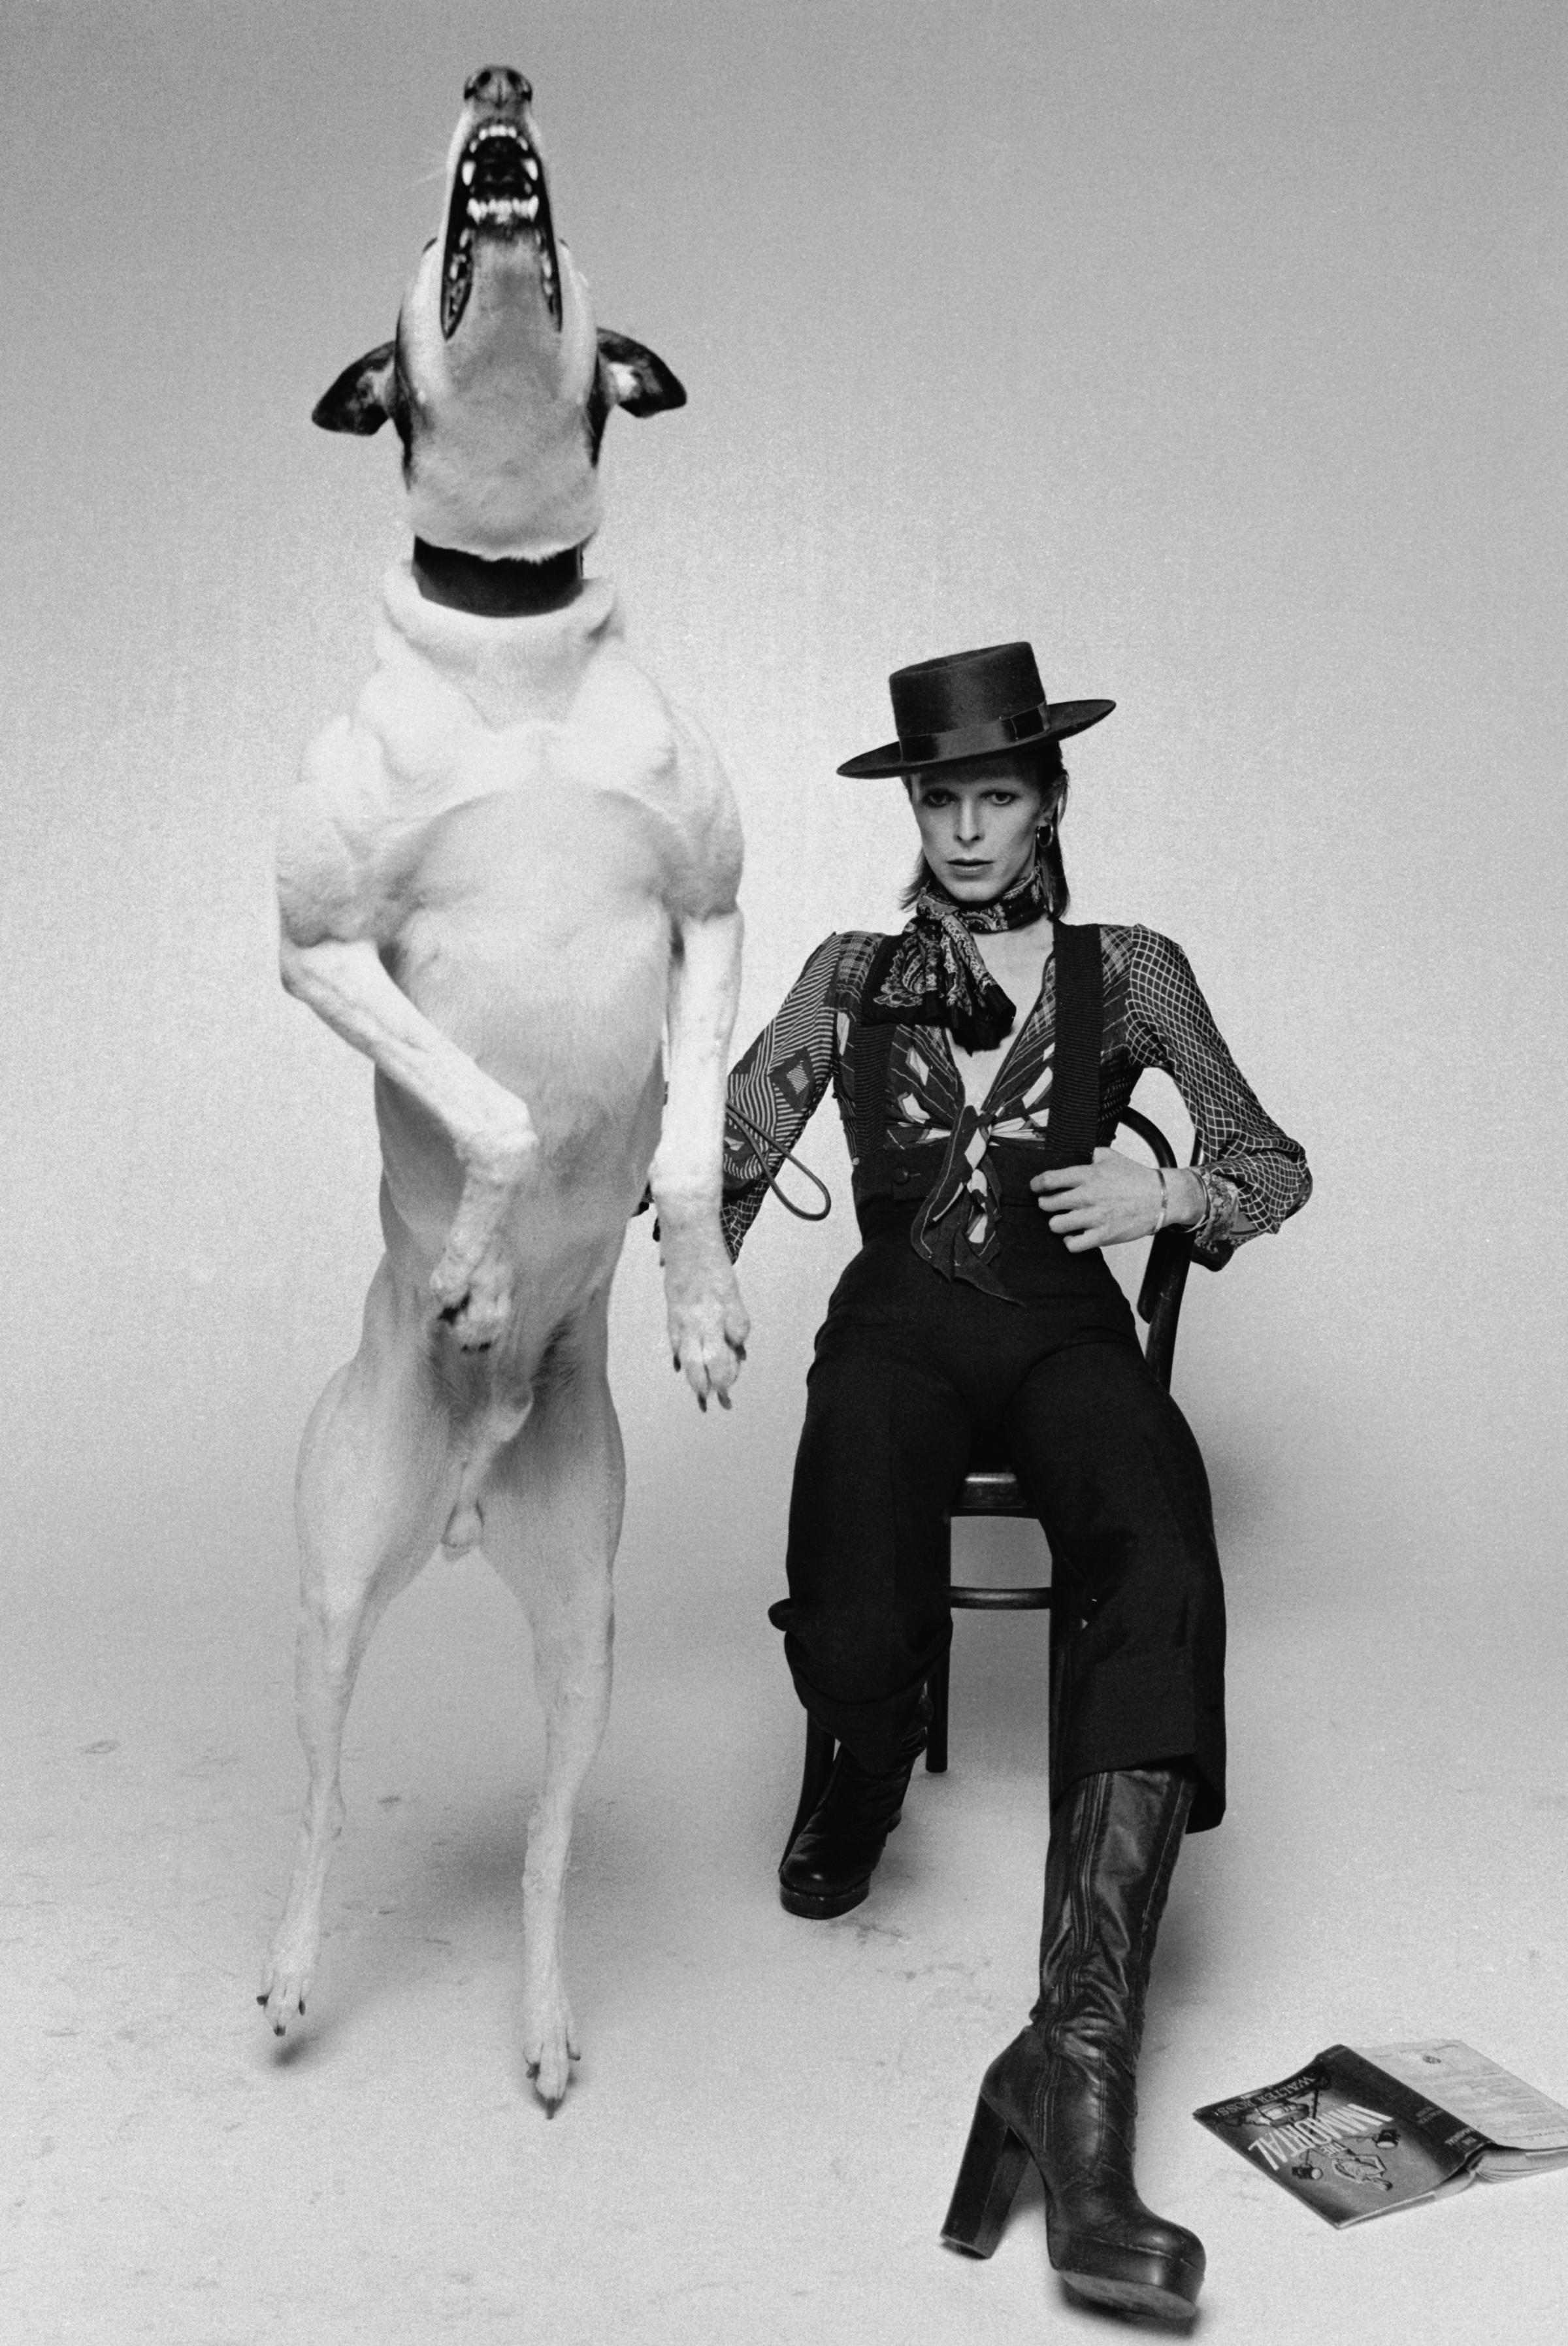 David Bowie is seen with a large barking dog while working on the artwork for his album Diamond Dogs in London in 1974.